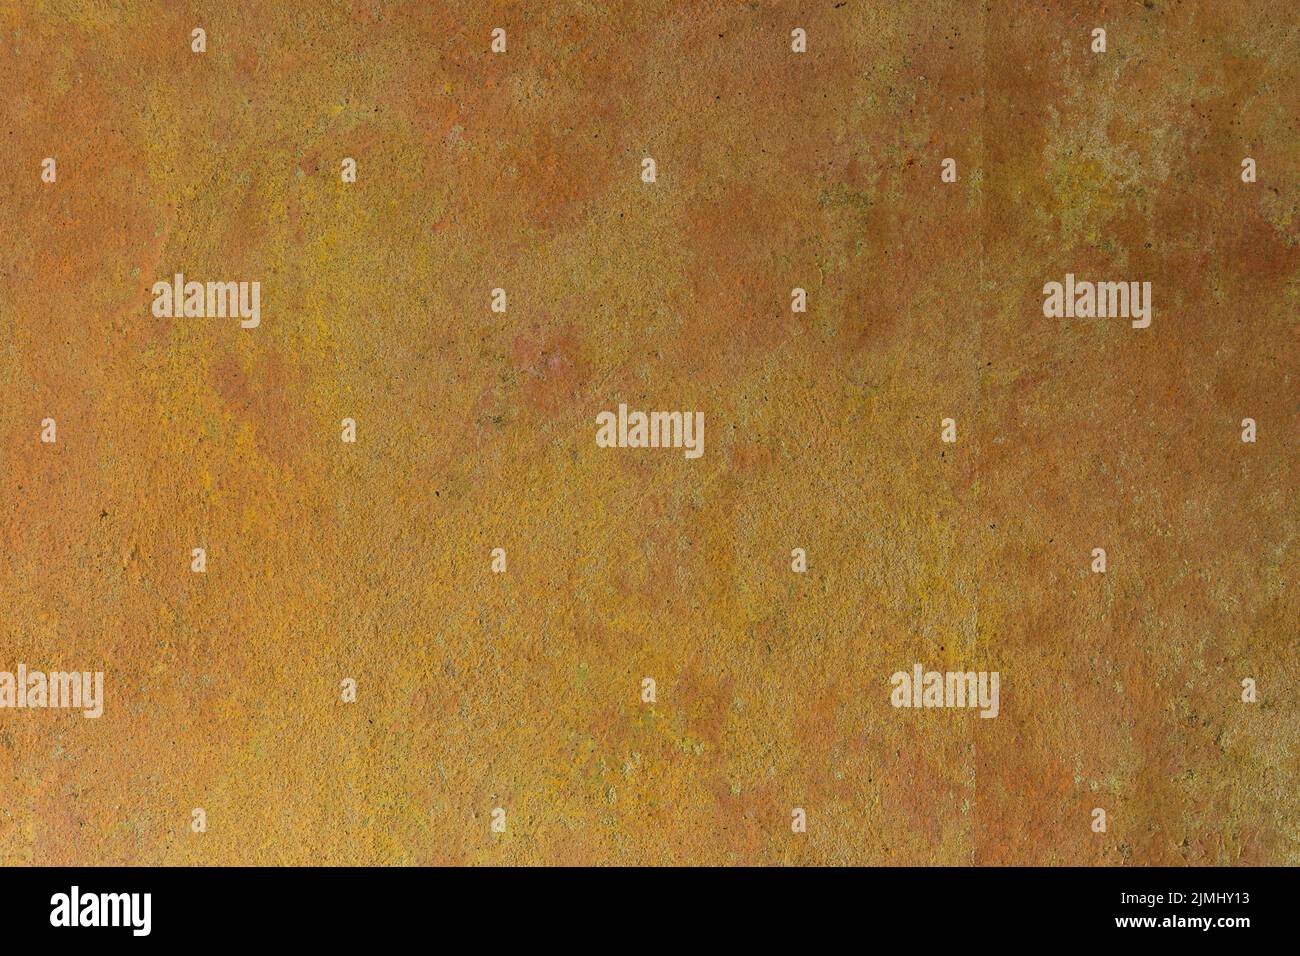 The yellow-orange texture of the aged concrete wall of an old house. Decorative textured plaster, inside surface finish at home. Abstract background with construction concept. Stock Photo